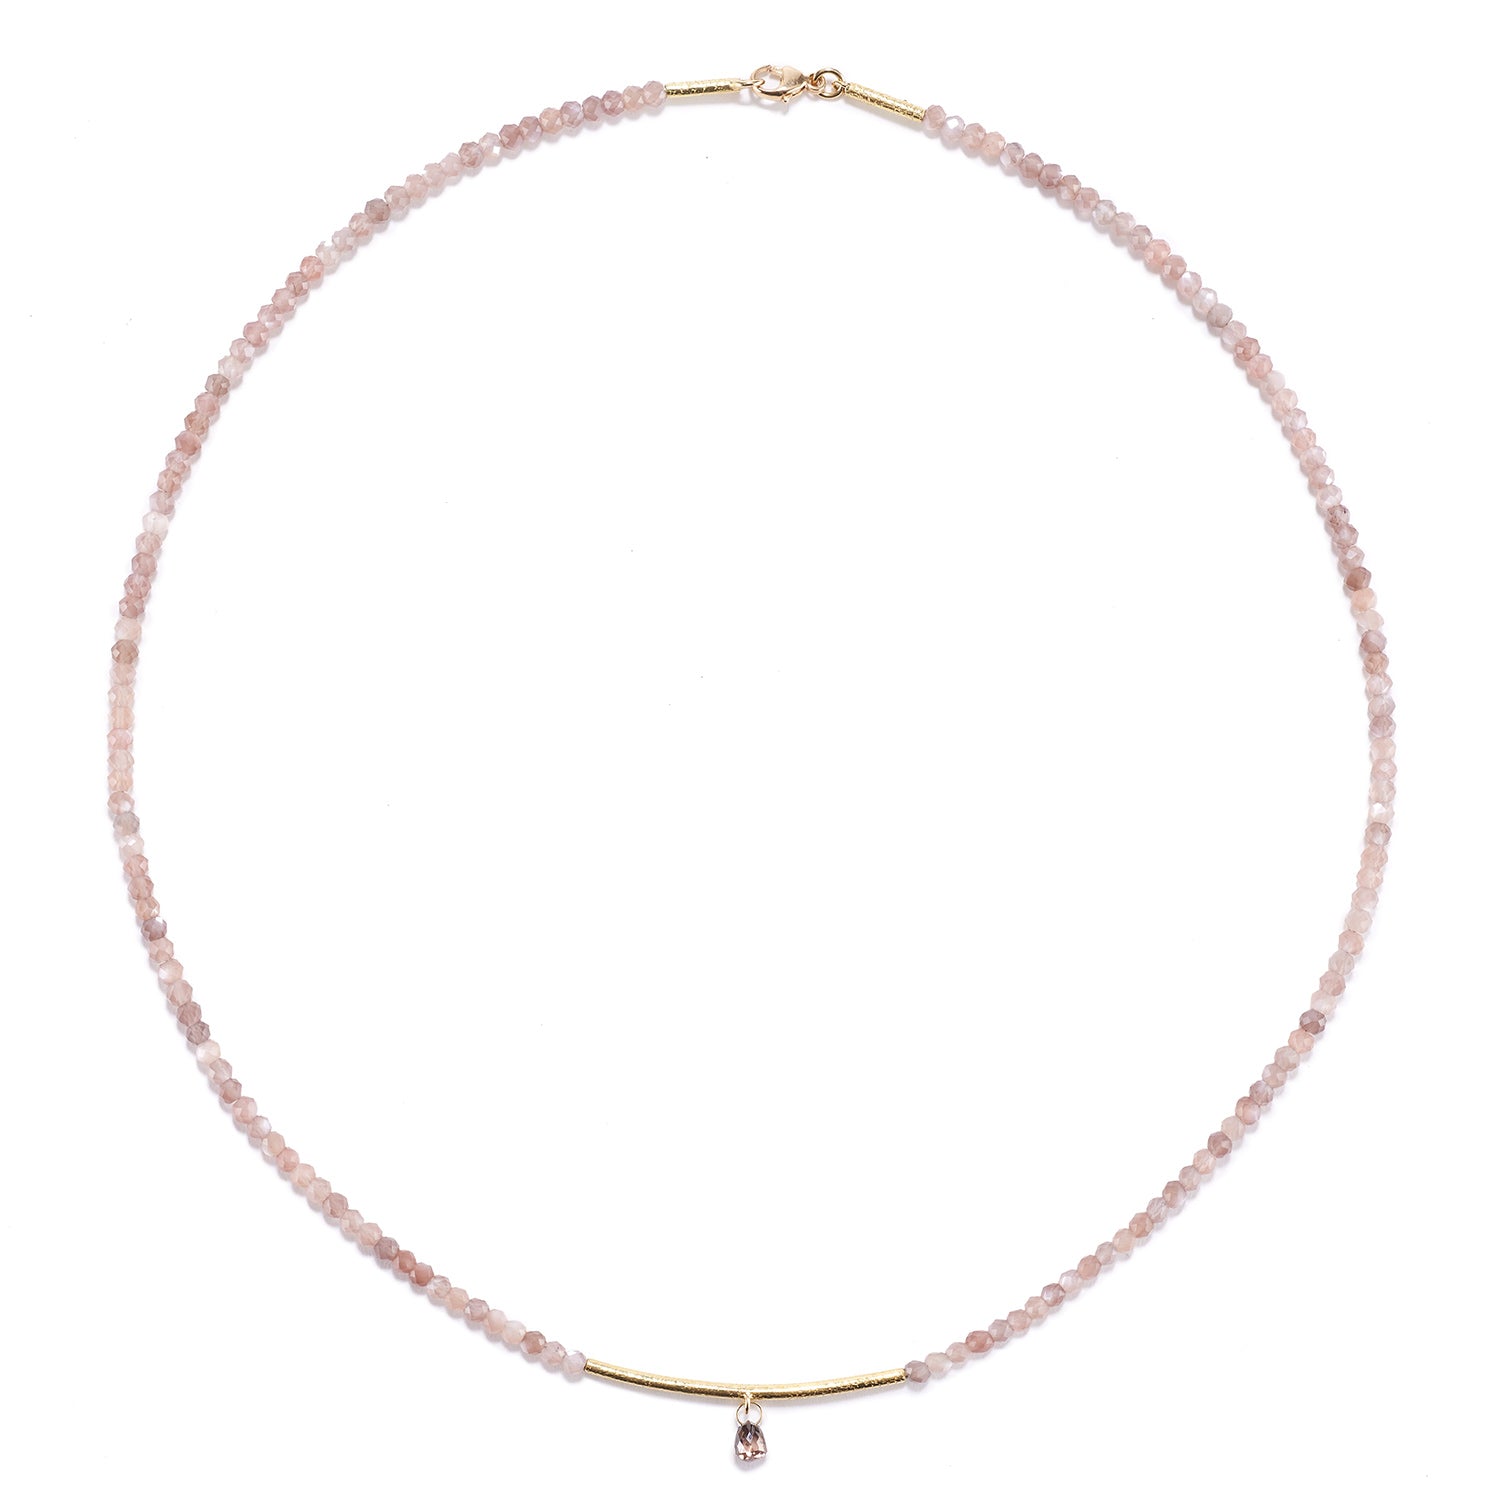 Navette Bar, Moonstone and Diamond Drop Necklace